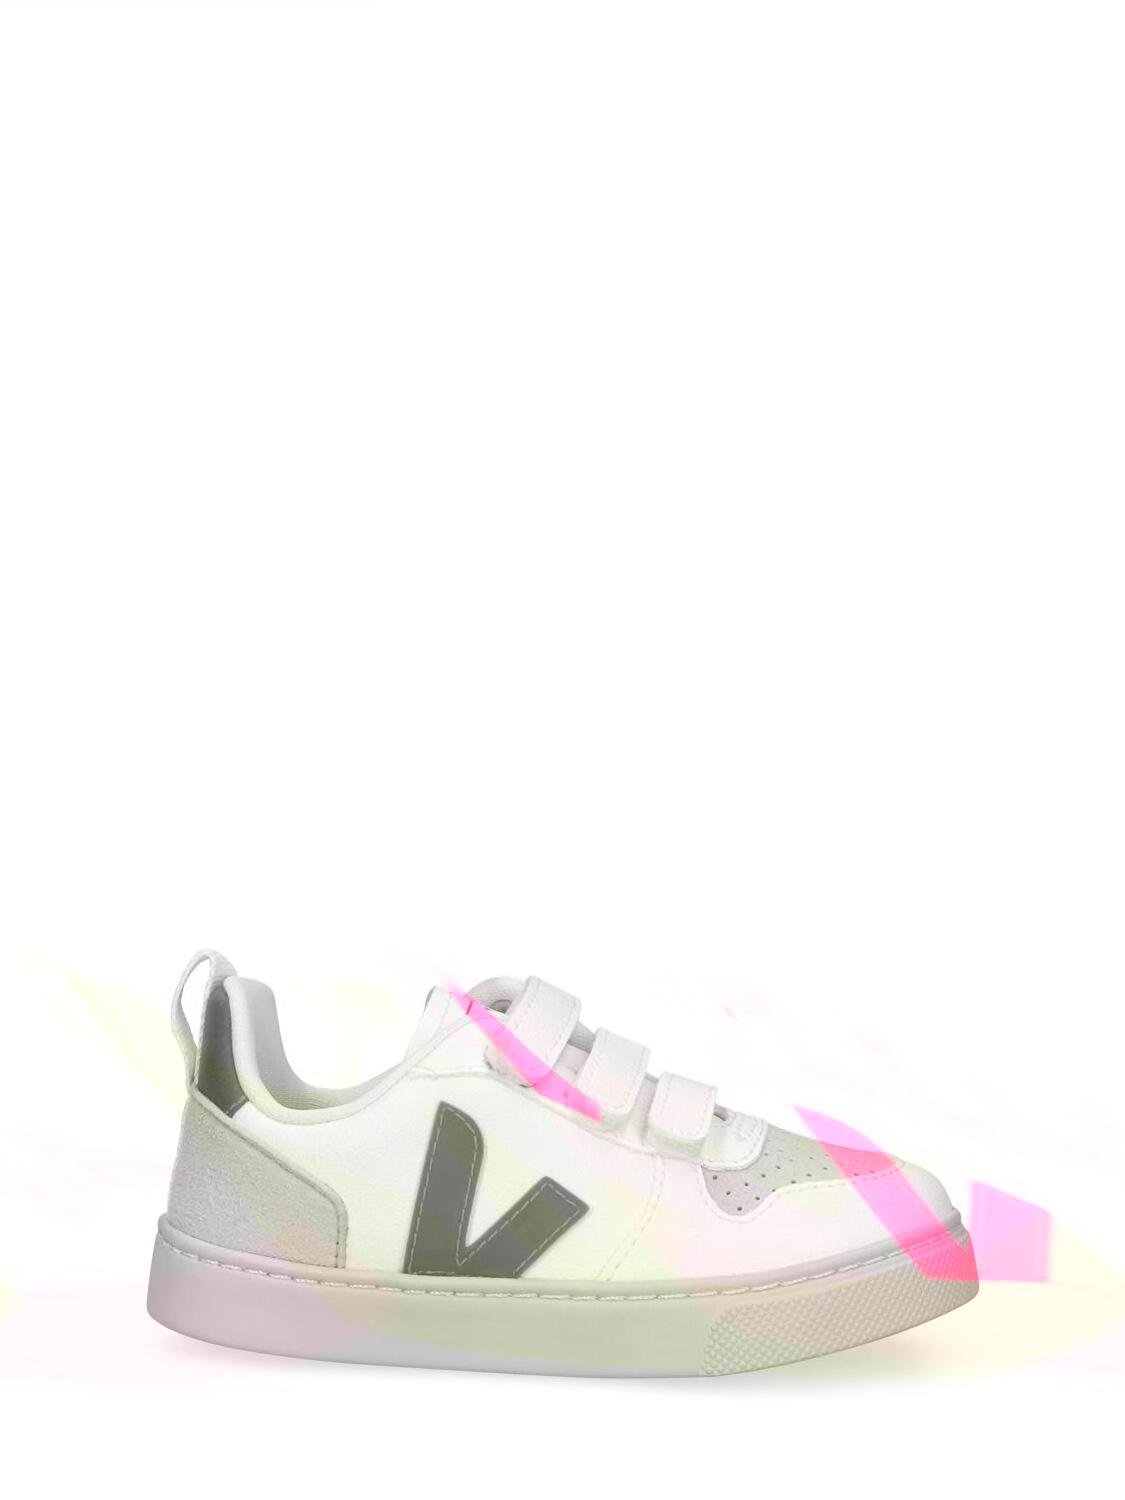 V-10 Chrome-free Leather Strap Sneakers by VEJA